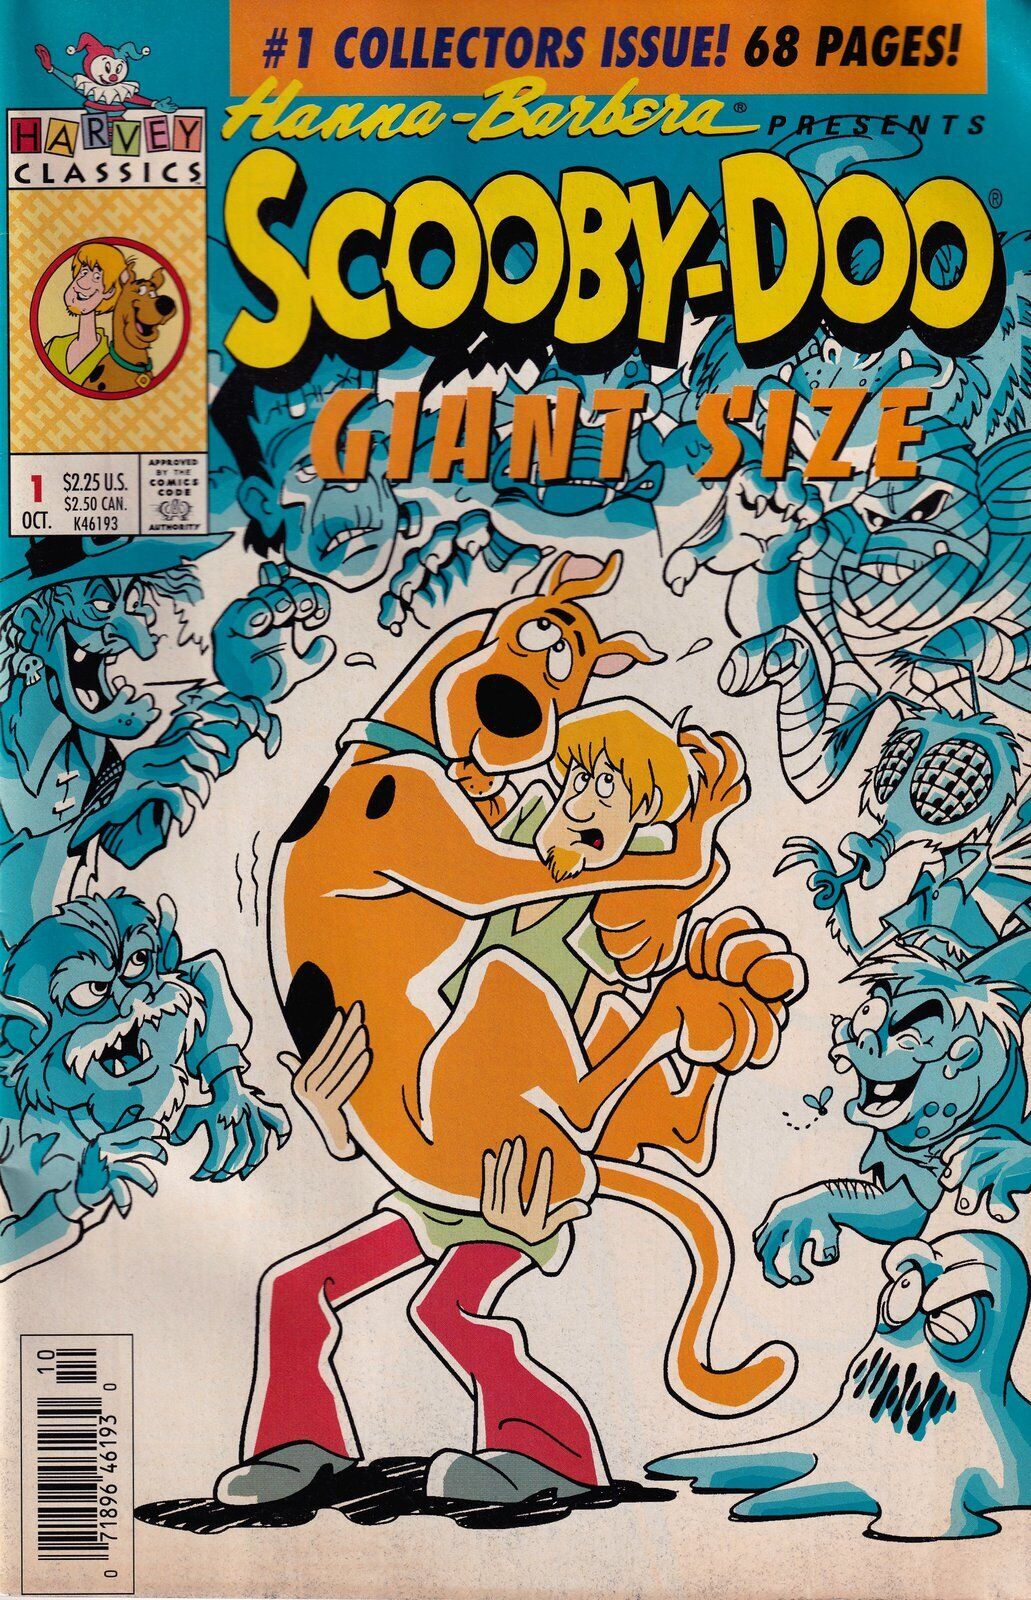 Scooby Doo Giant Size #1 Newsstand Cover (1992-1993) Harvey Comics